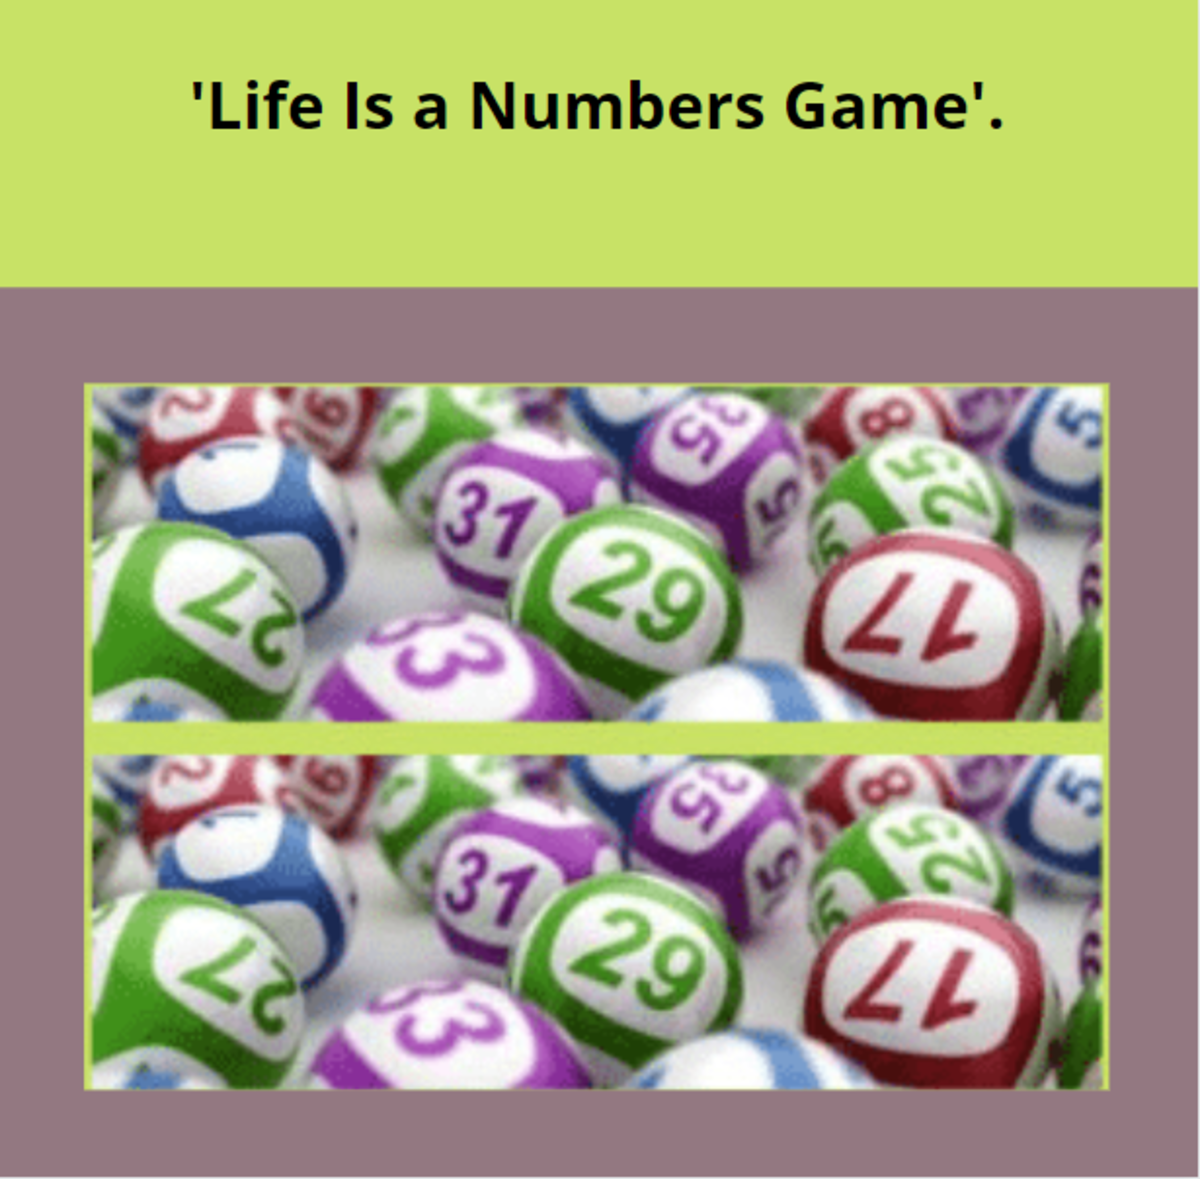 'Life Is a Numbers Game'.